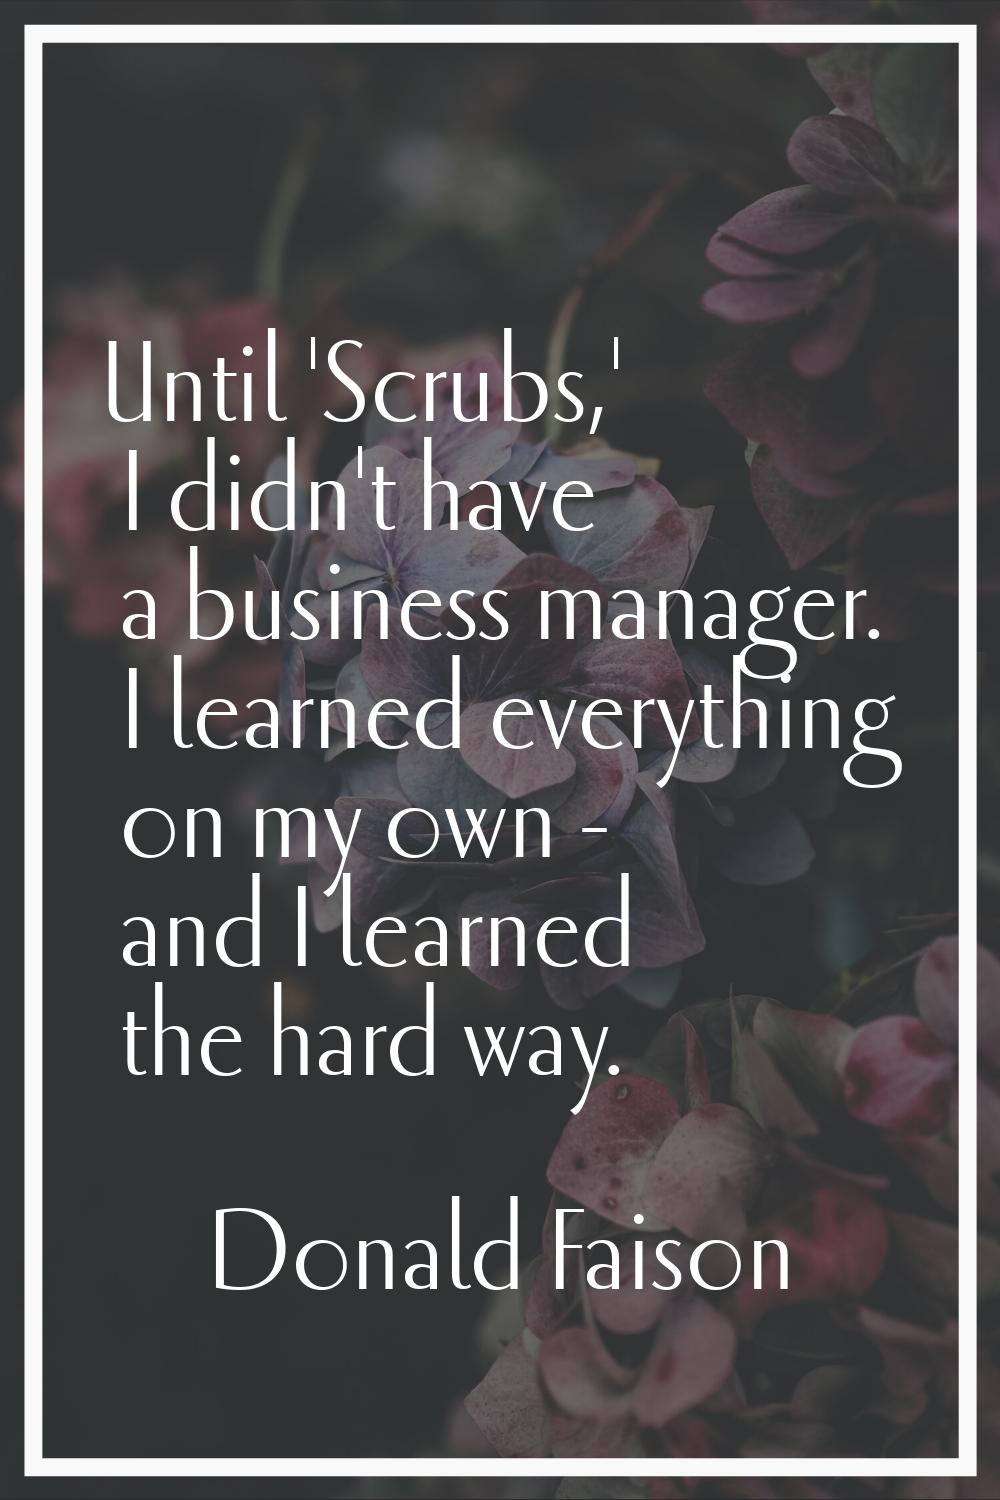 Until 'Scrubs,' I didn't have a business manager. I learned everything on my own - and I learned th